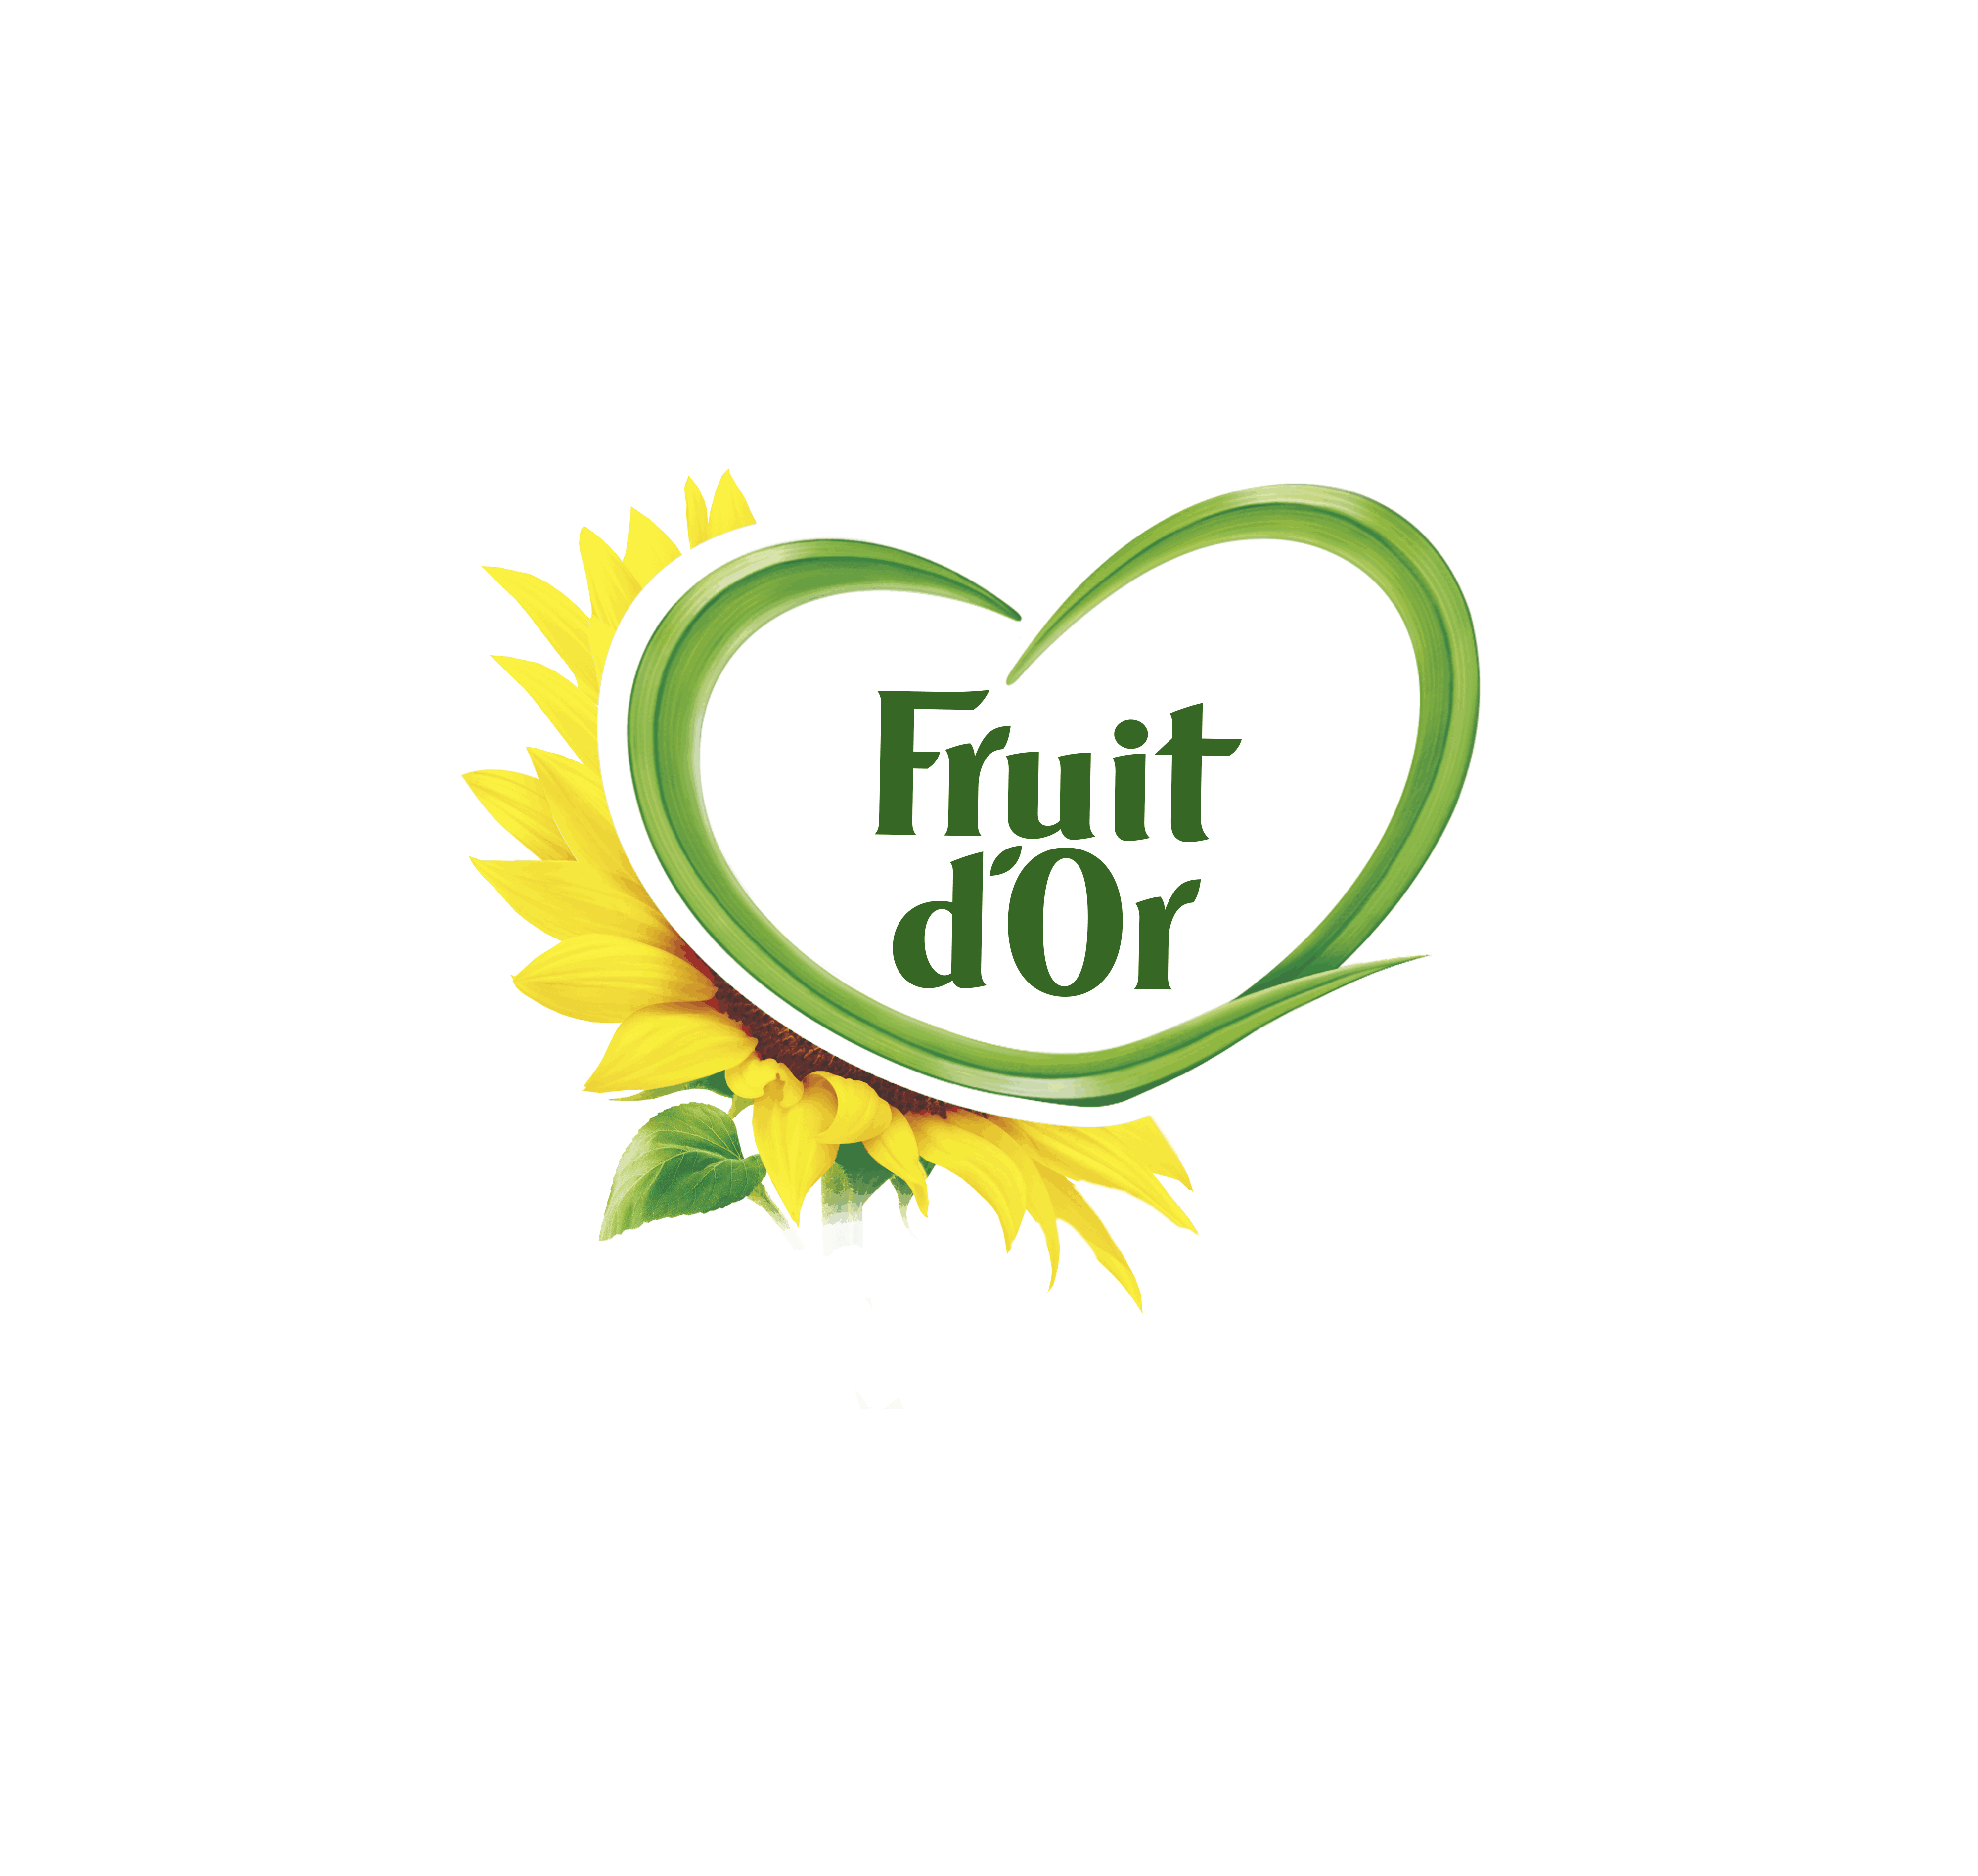 fruit d'or